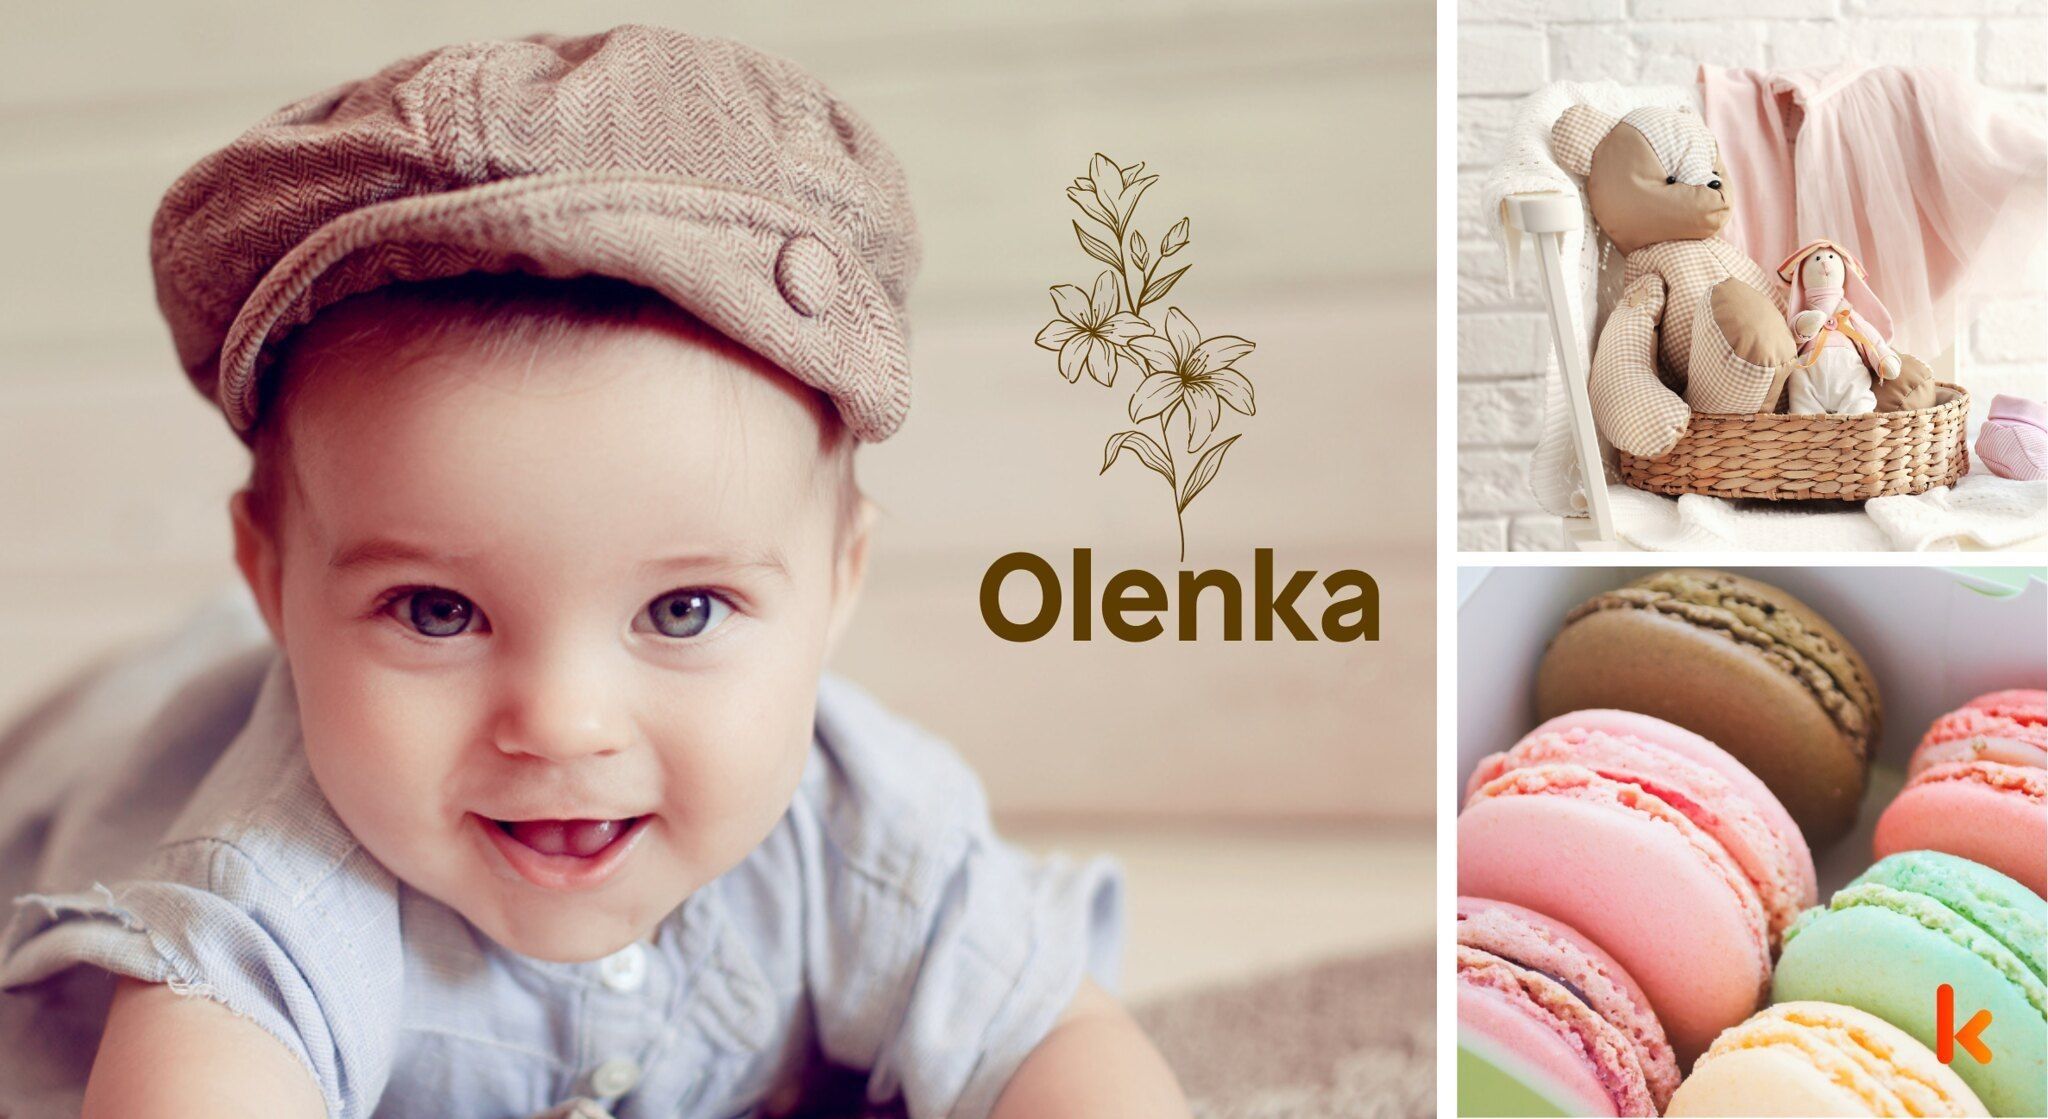 Meaning of the name Olenka